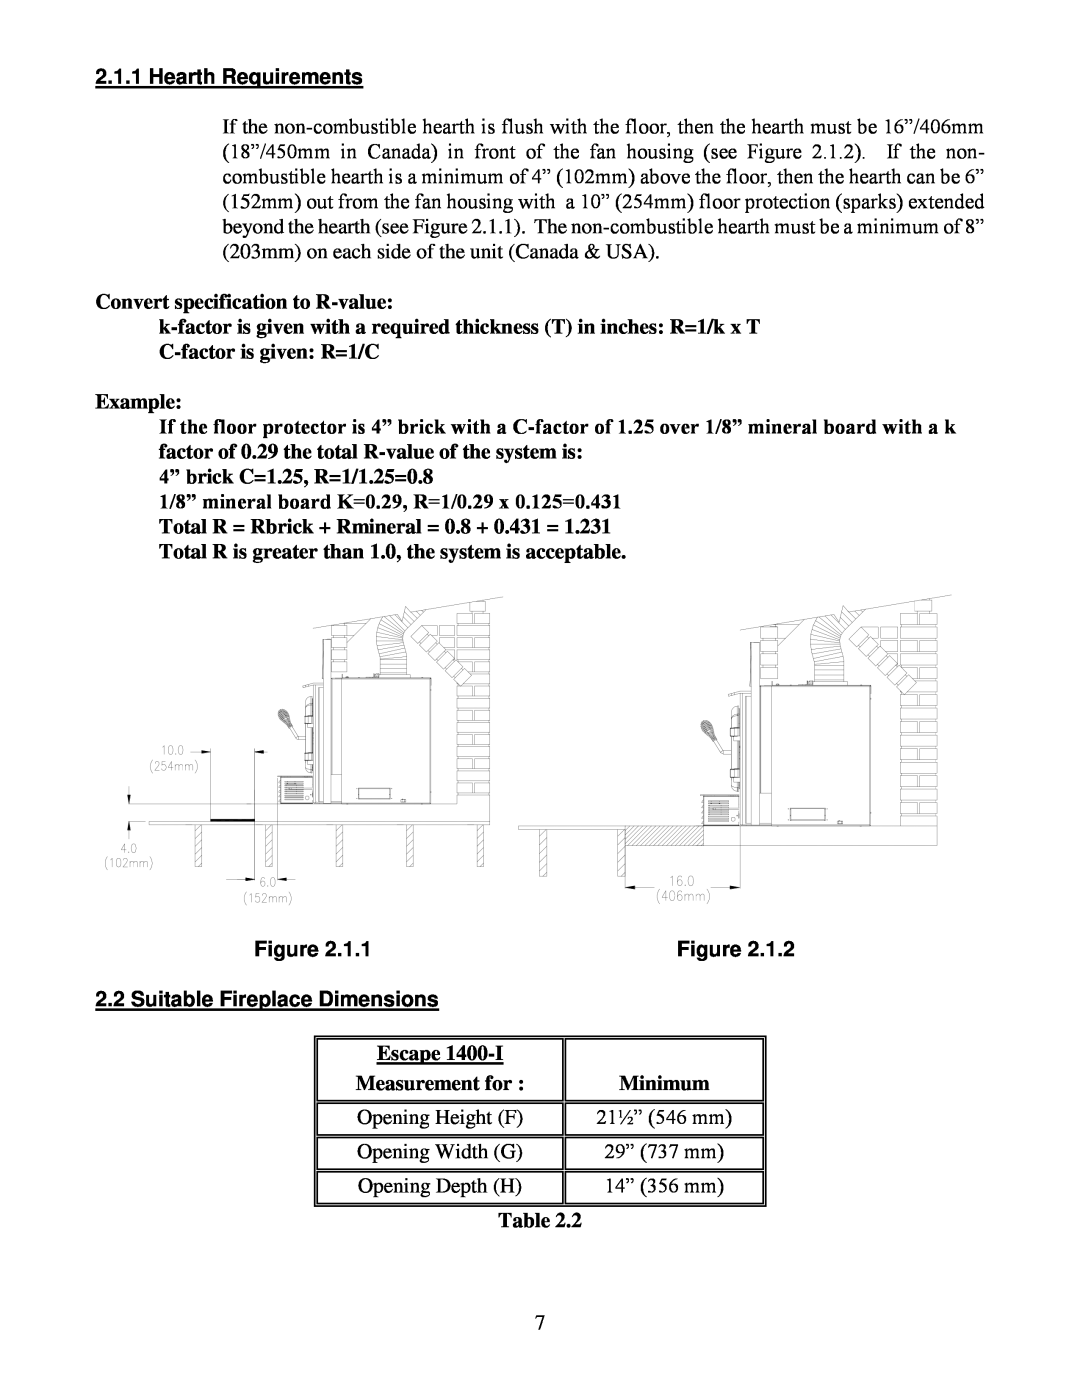 Drolet 45221 owner manual Hearth Requirements, Suitable Fireplace Dimensions 